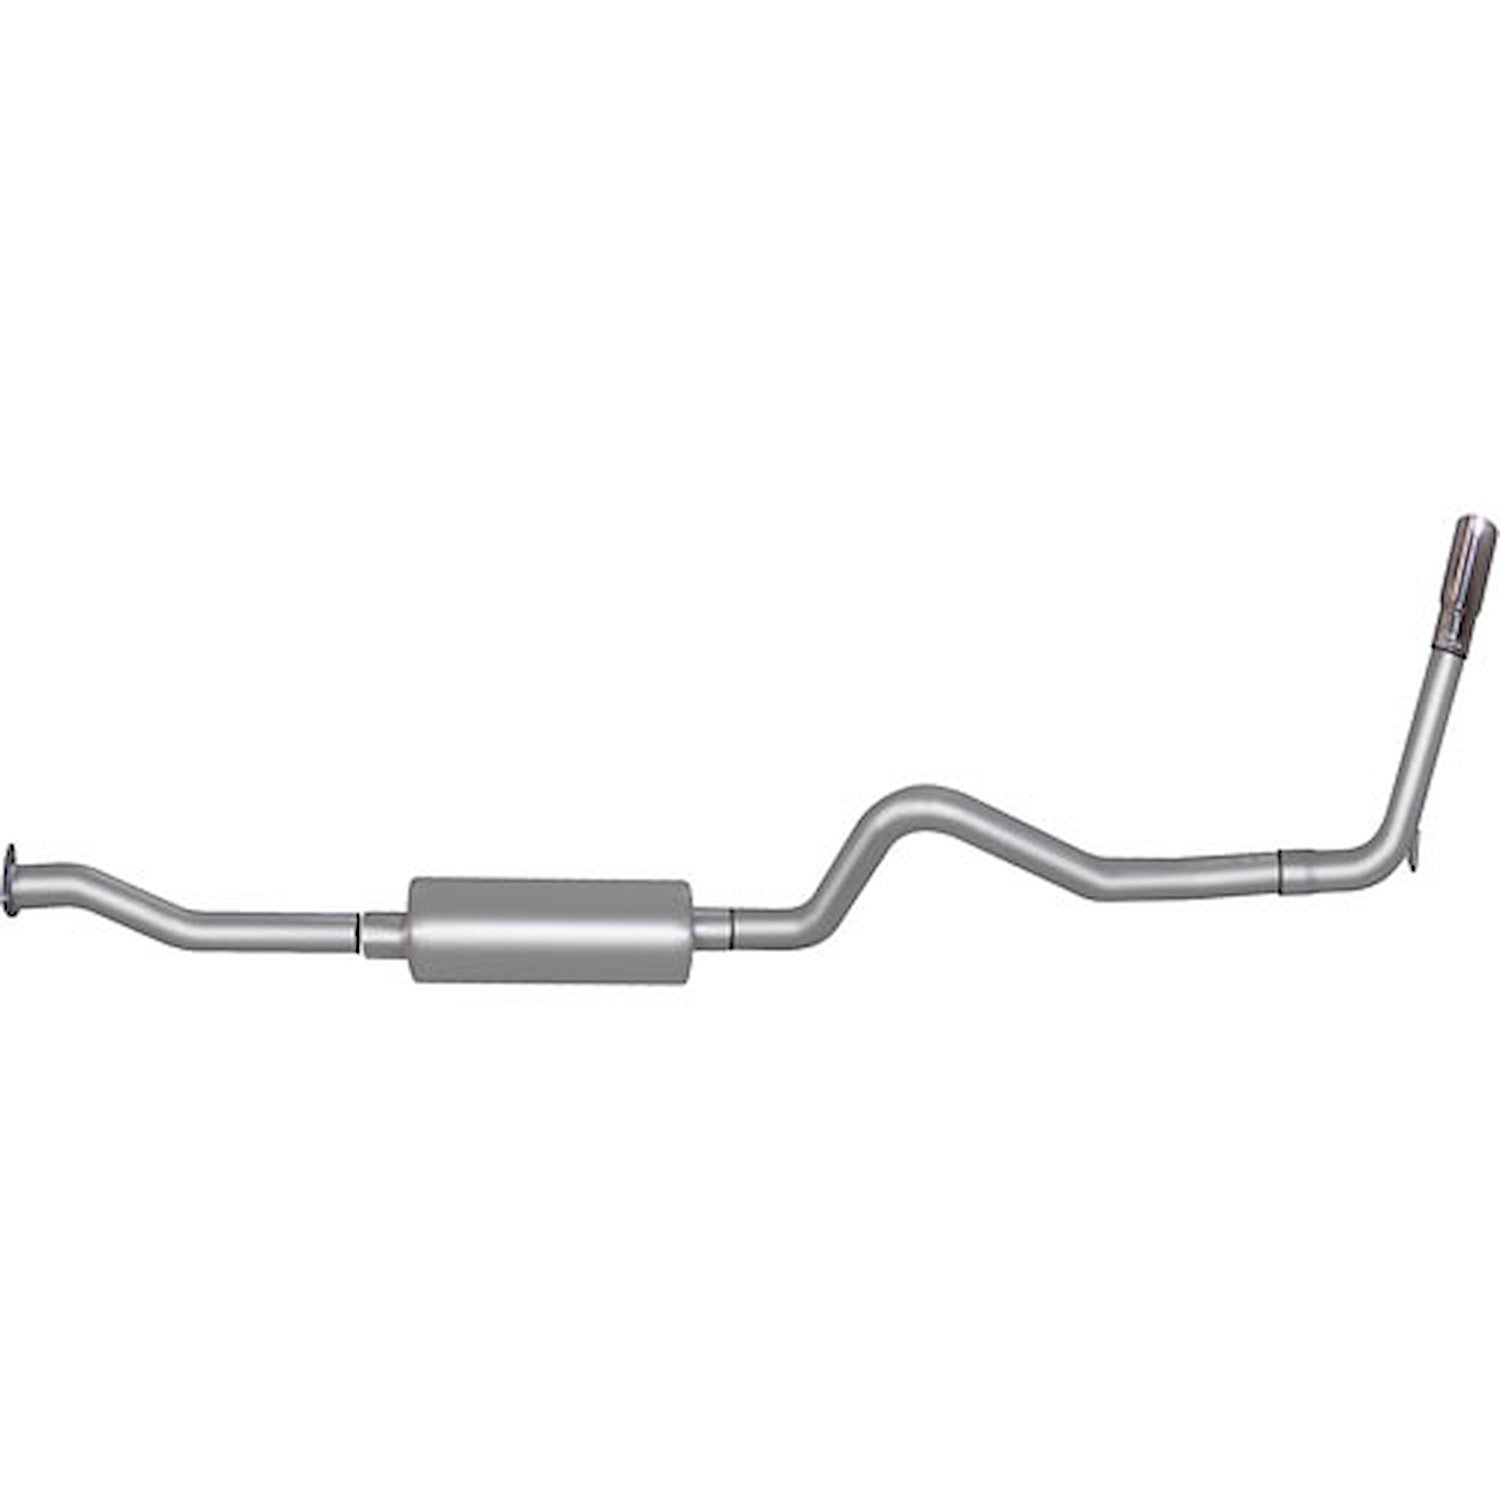 Swept-Side Aluminized Steel Cat-Back Exhaust 1998-03 Chevy S10/GMC Sonoma 2.2L